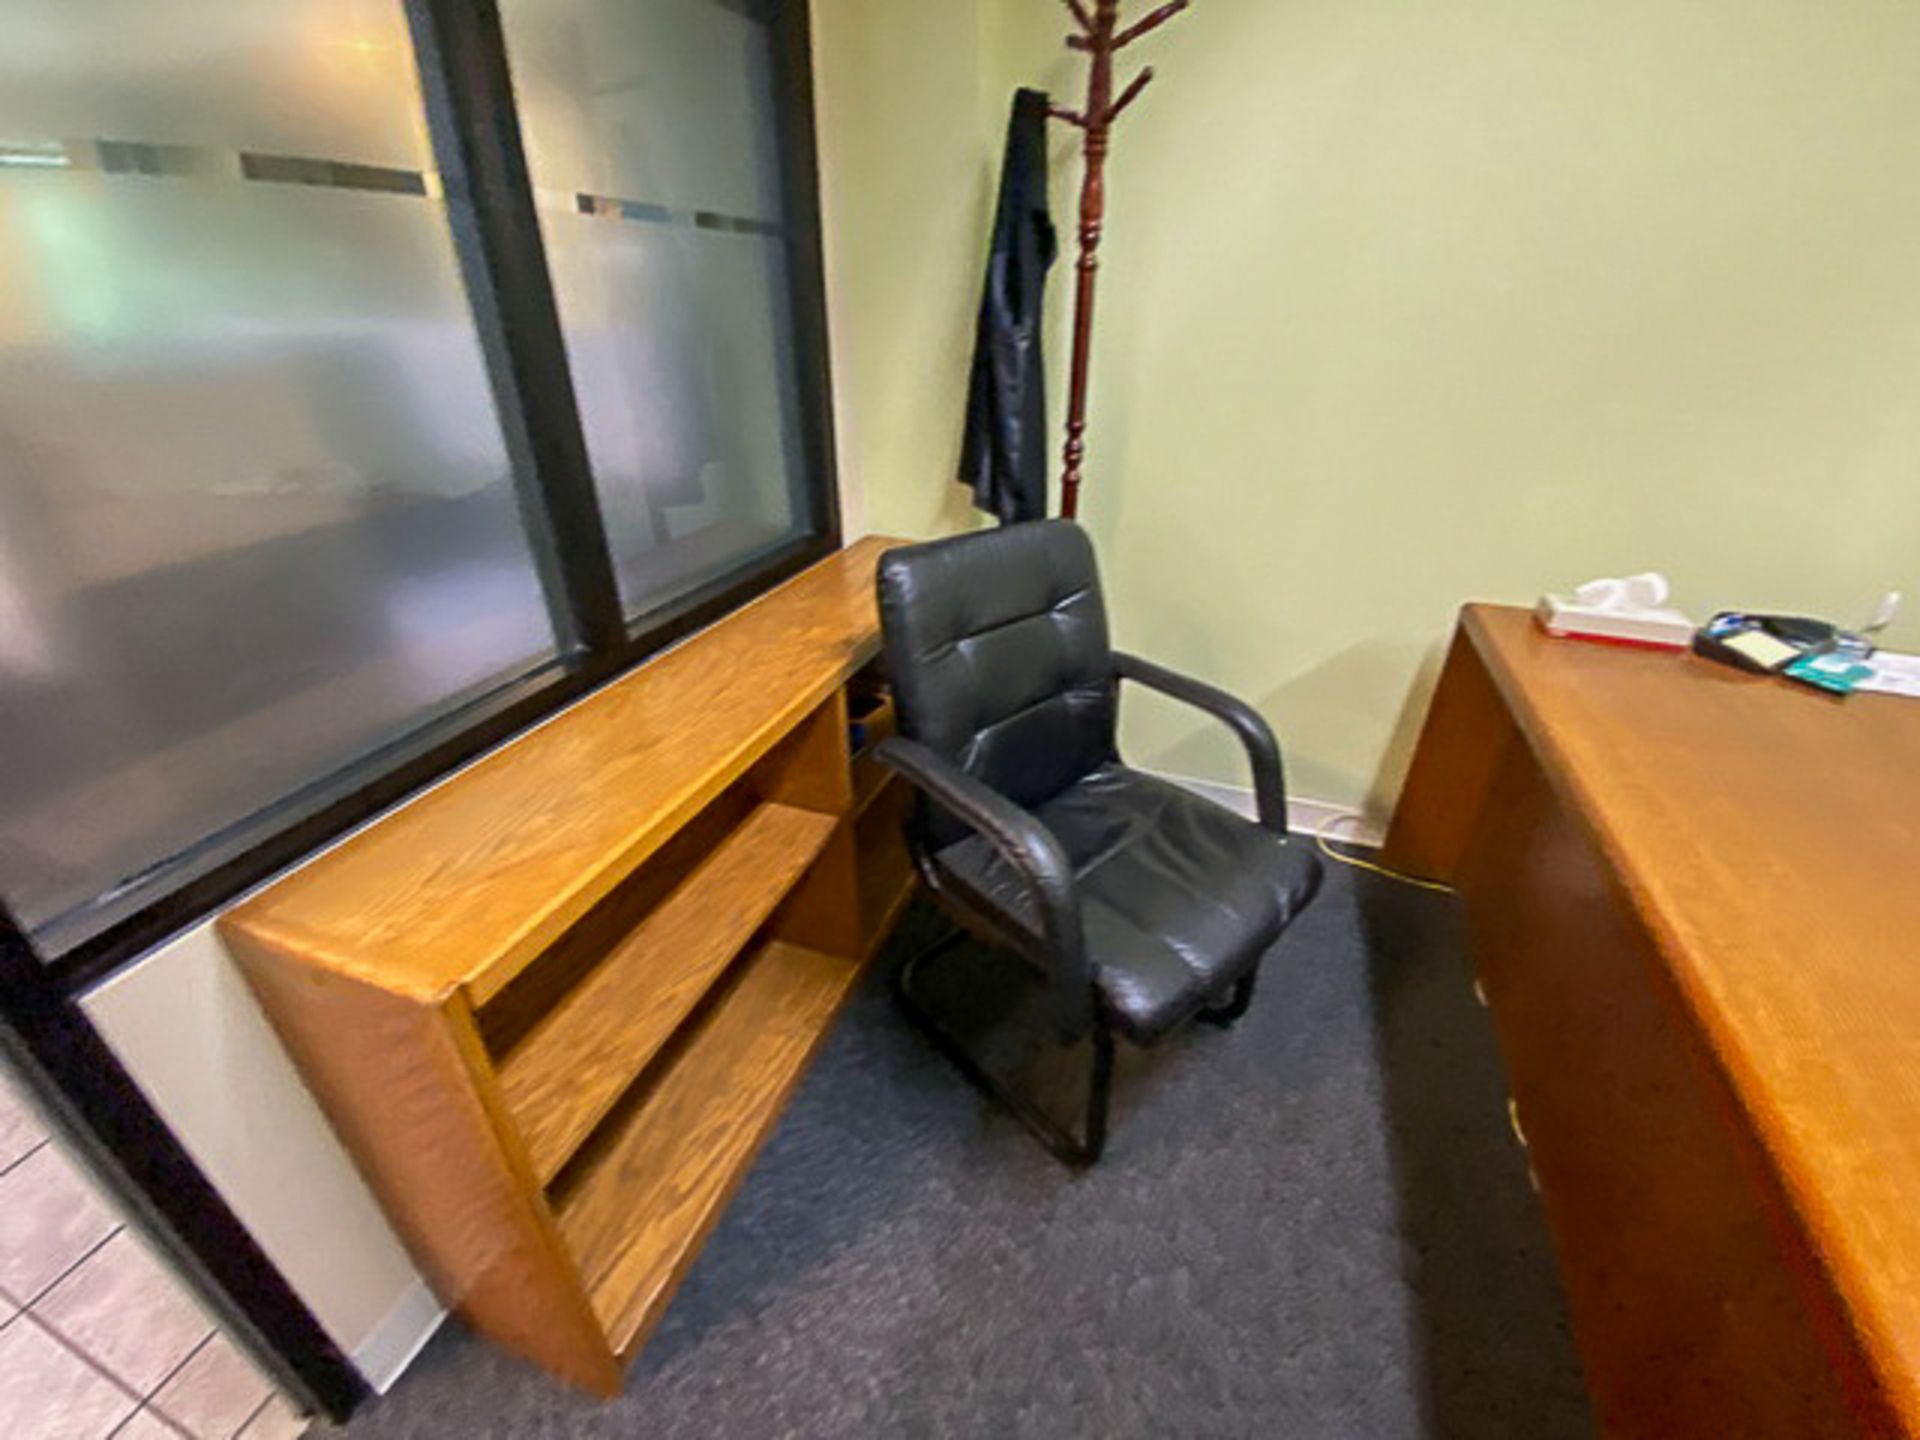 Lot c/o: Office Furniture - Image 4 of 11